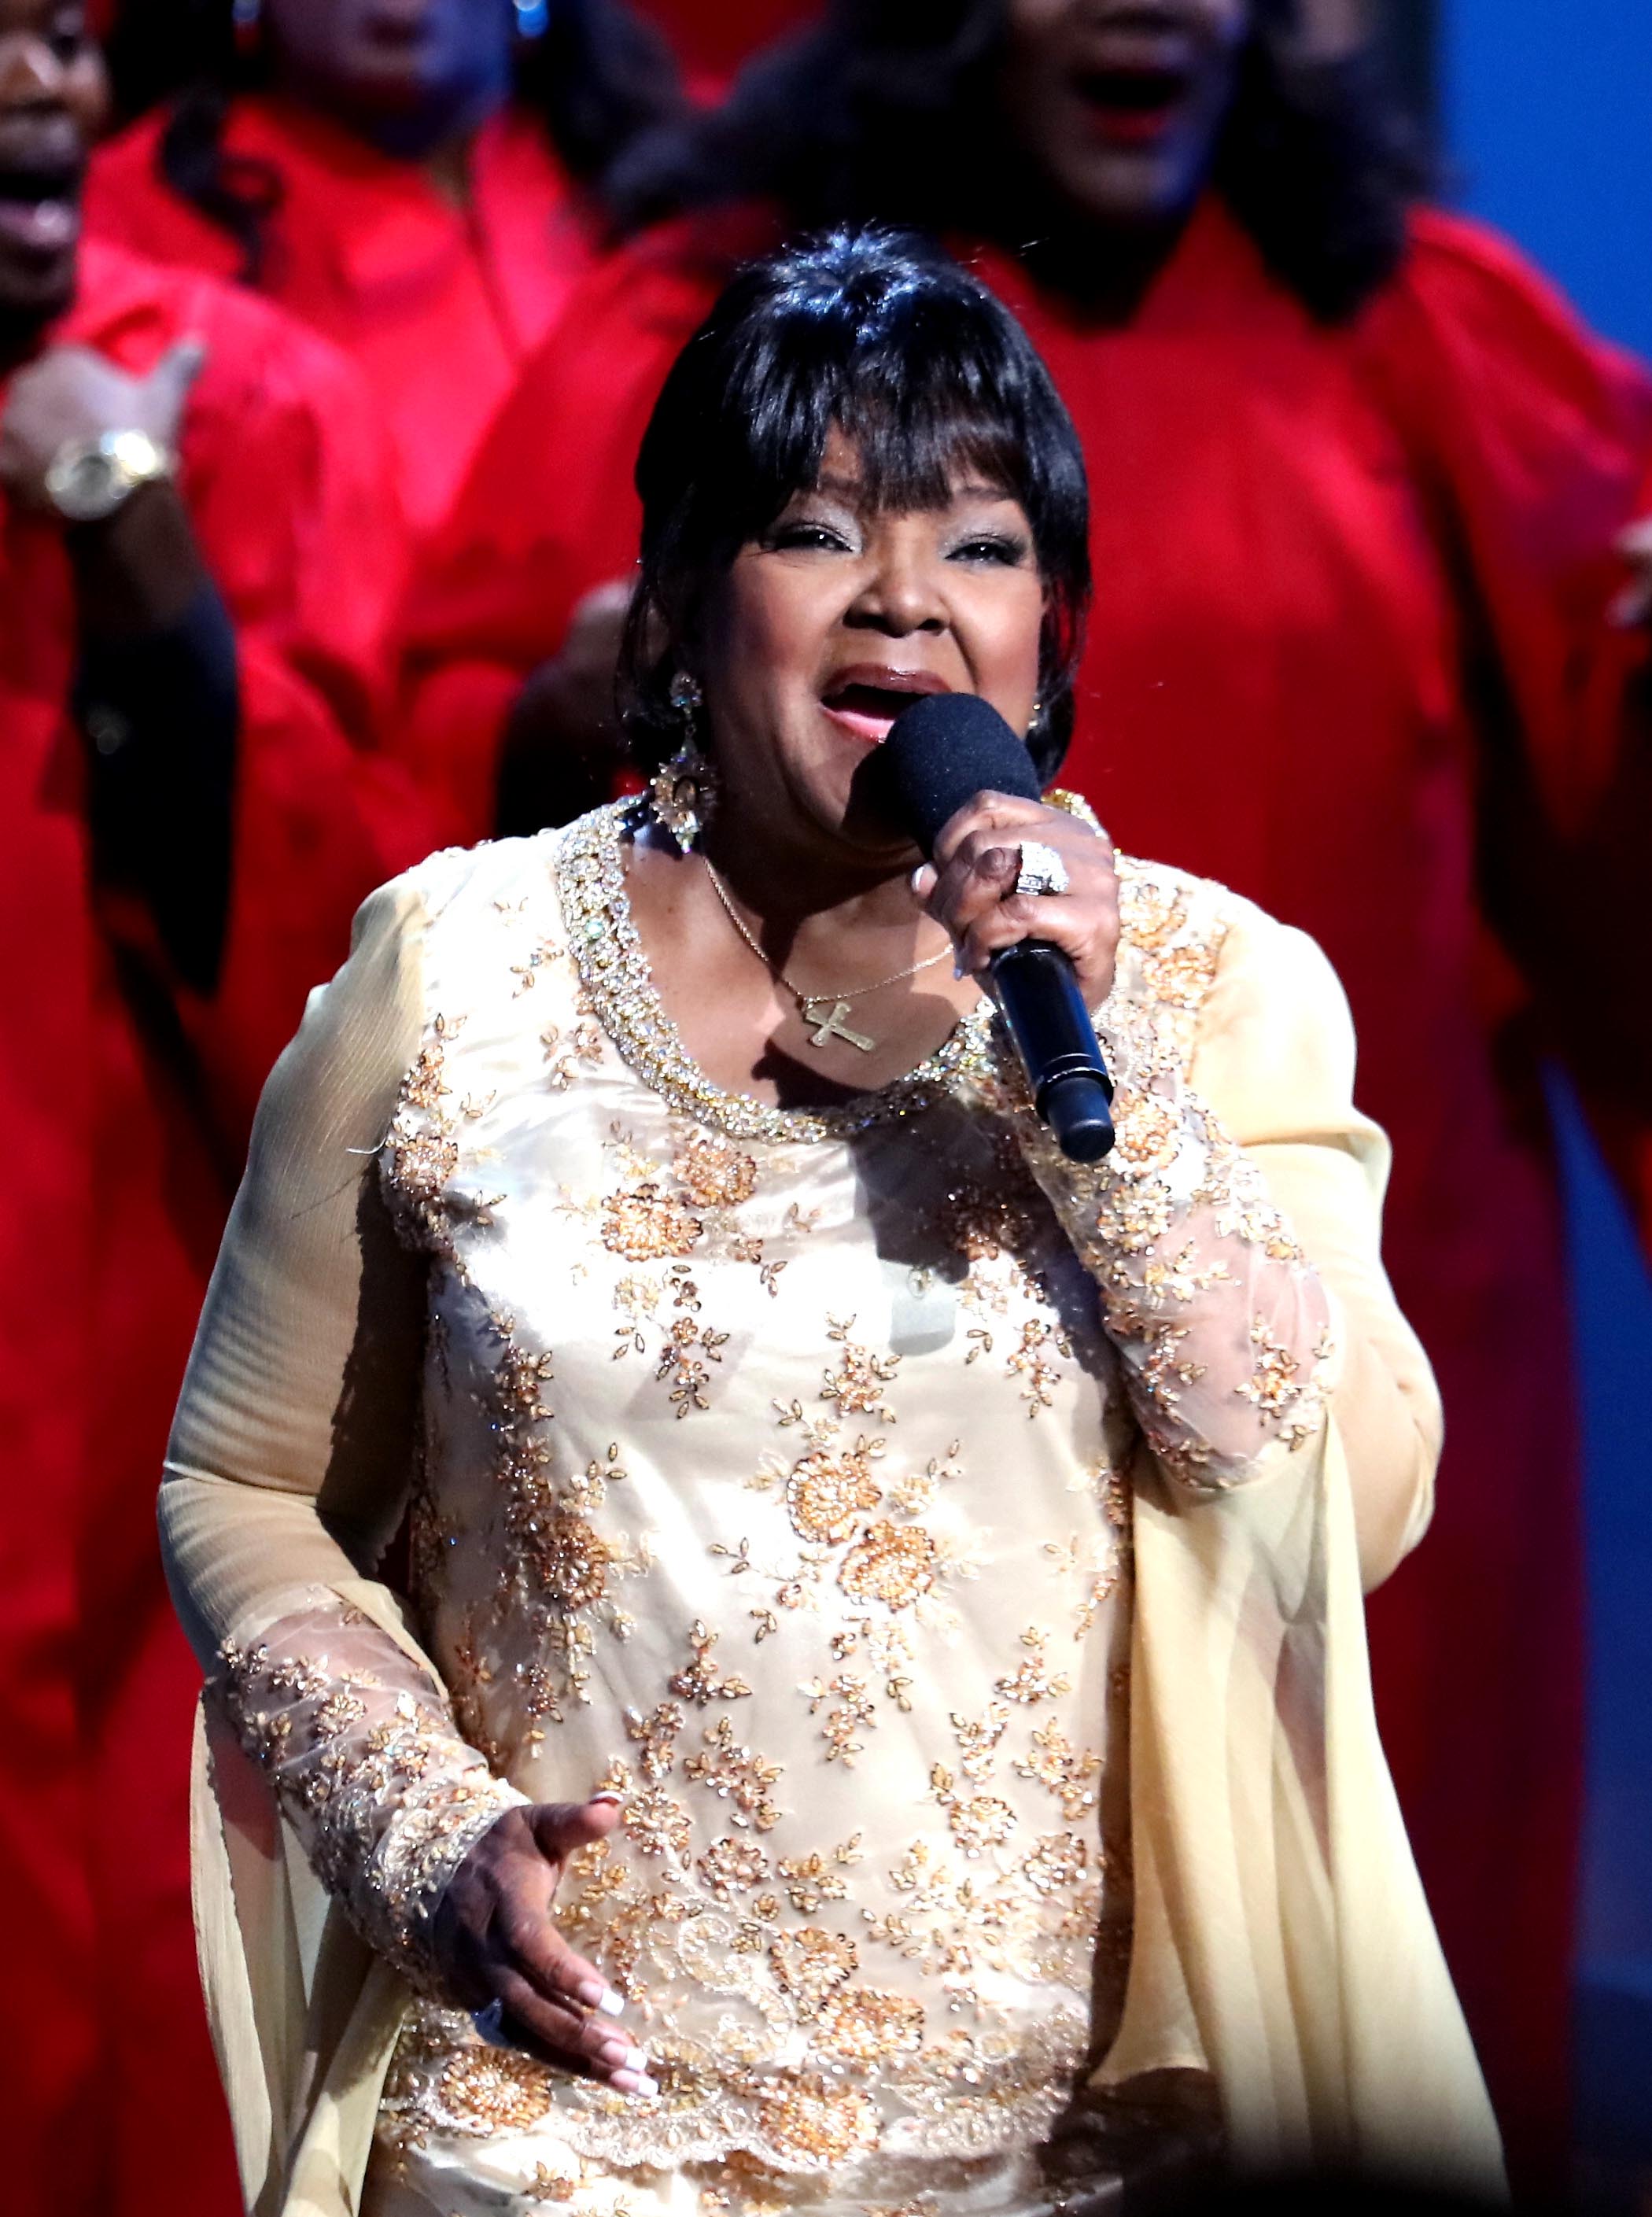 Pastor Shirley Caesar Is Not Suing #UNameItChallenge Producer...But She Doesn’t Want Him Profiting Either
